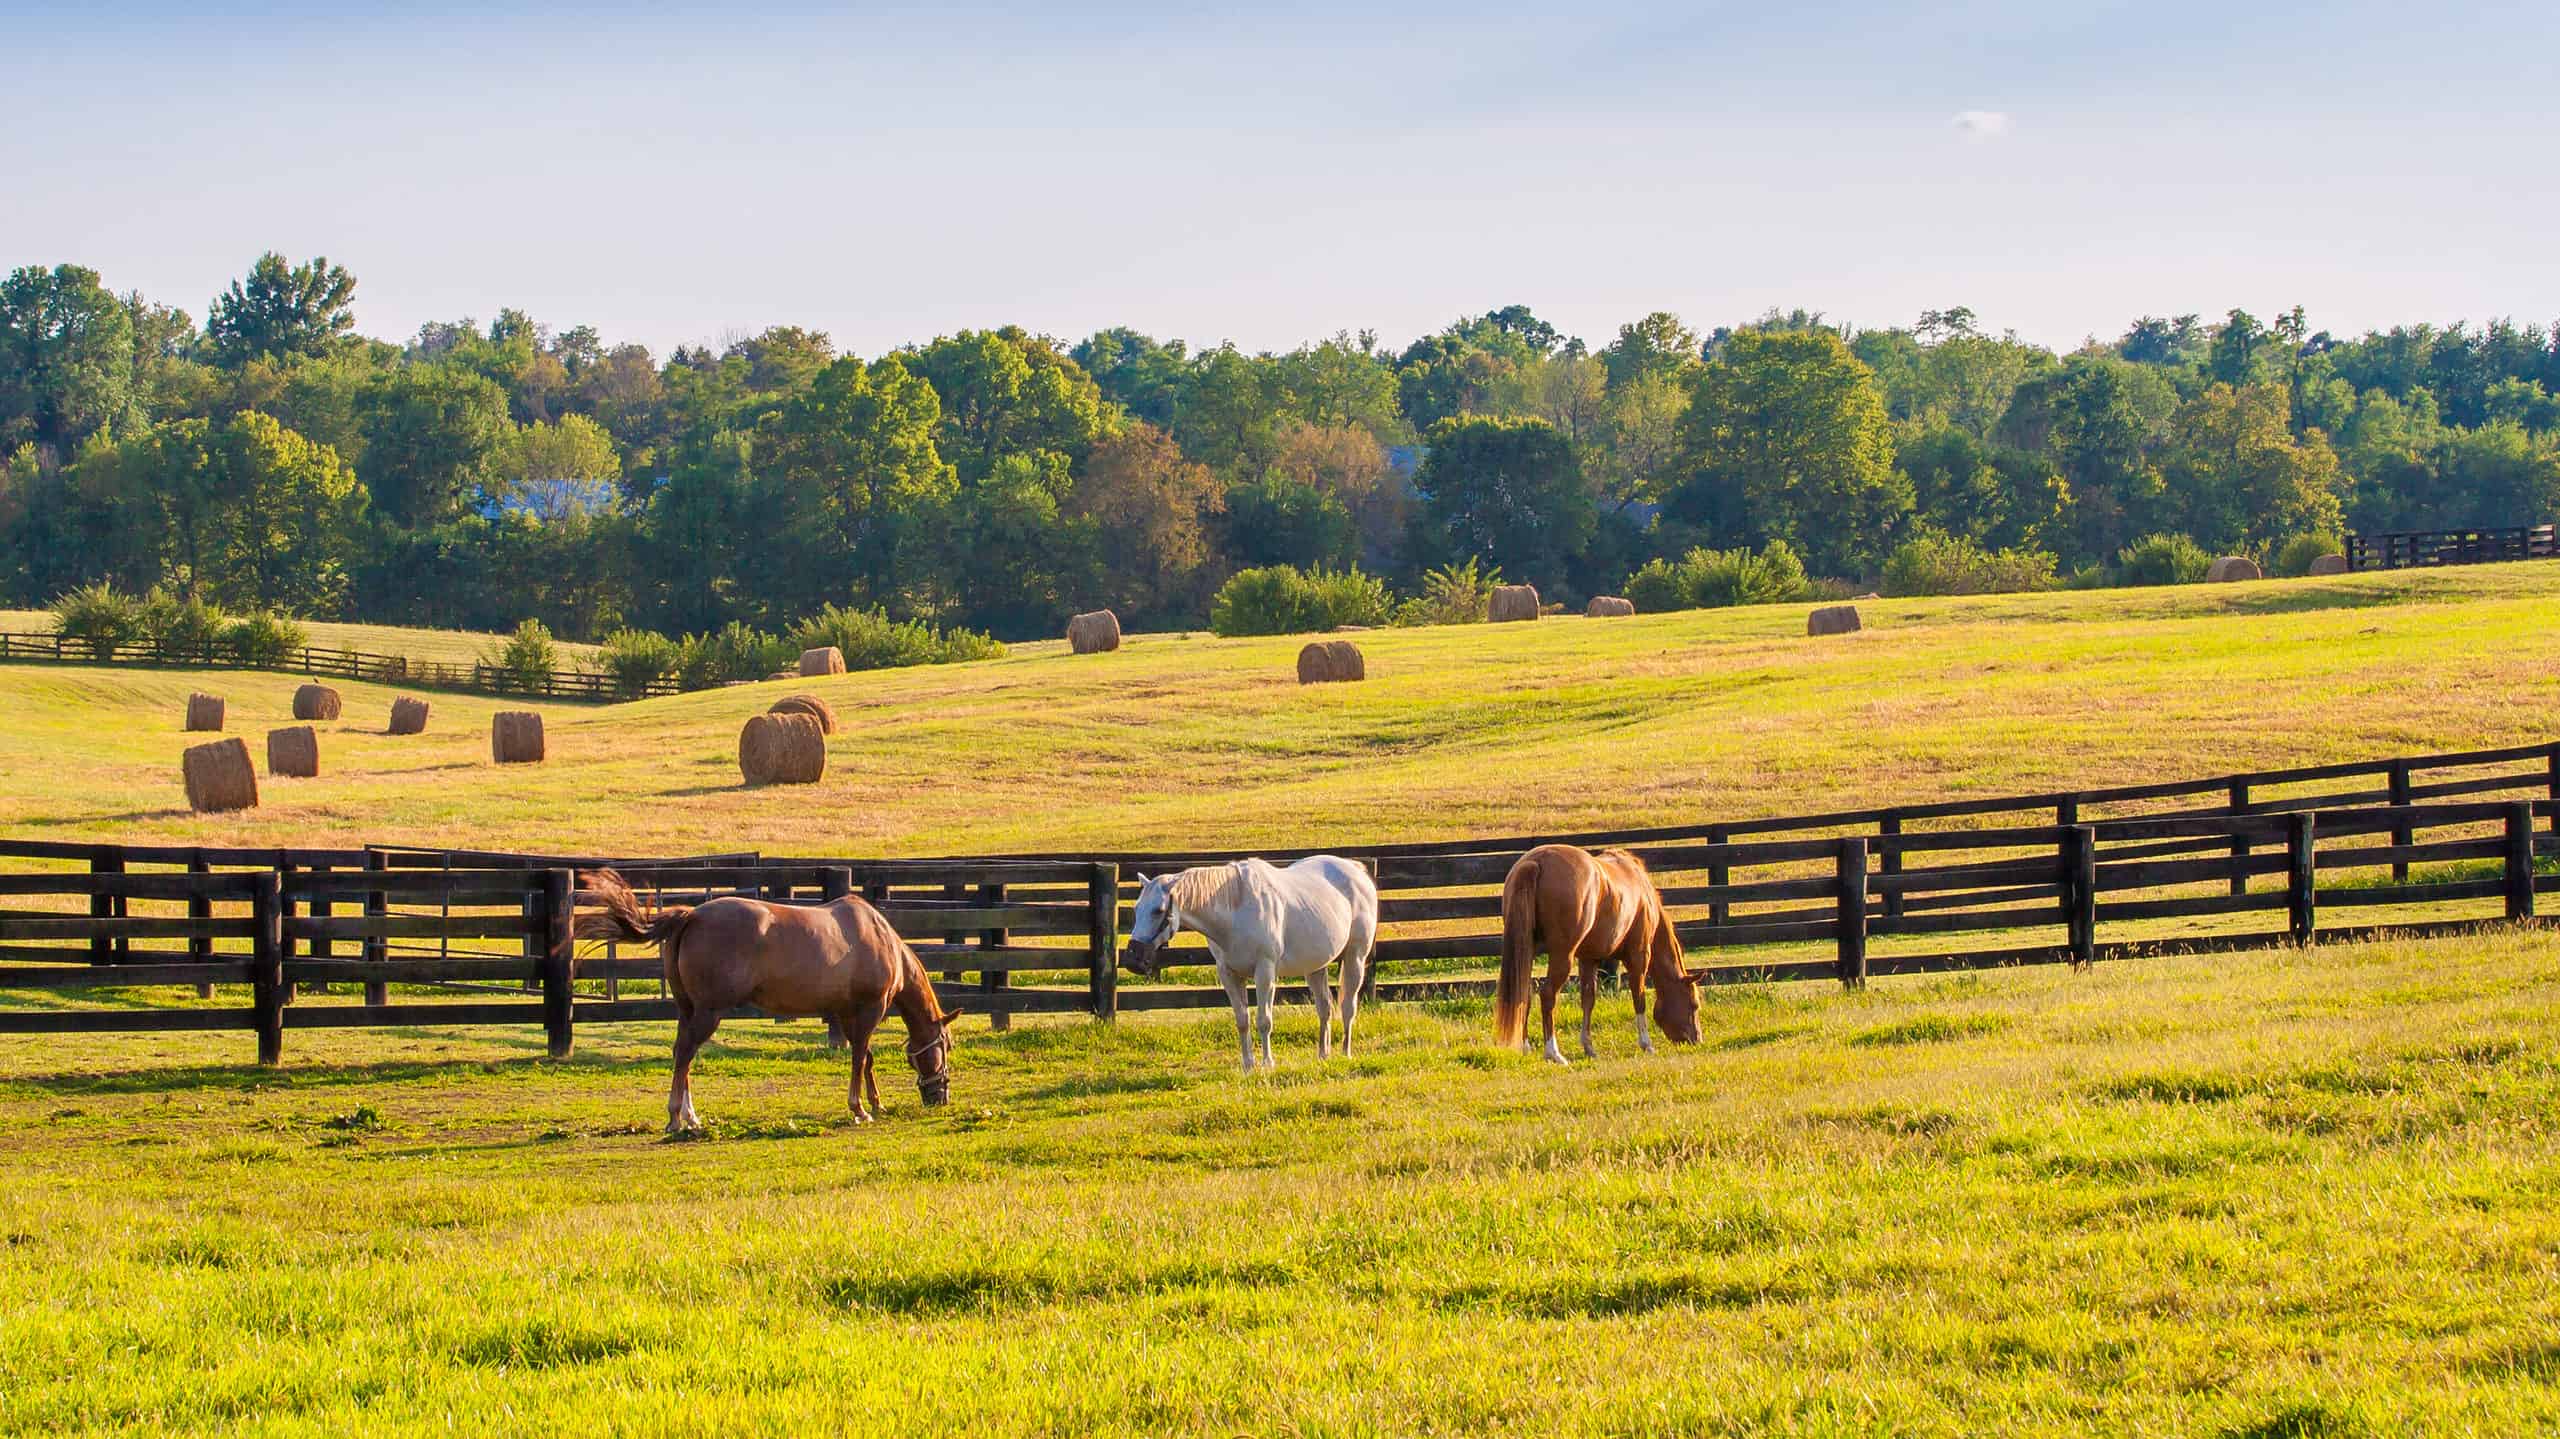 Horses at horse farm at golden hour. Country summer landscape in Kentucky.